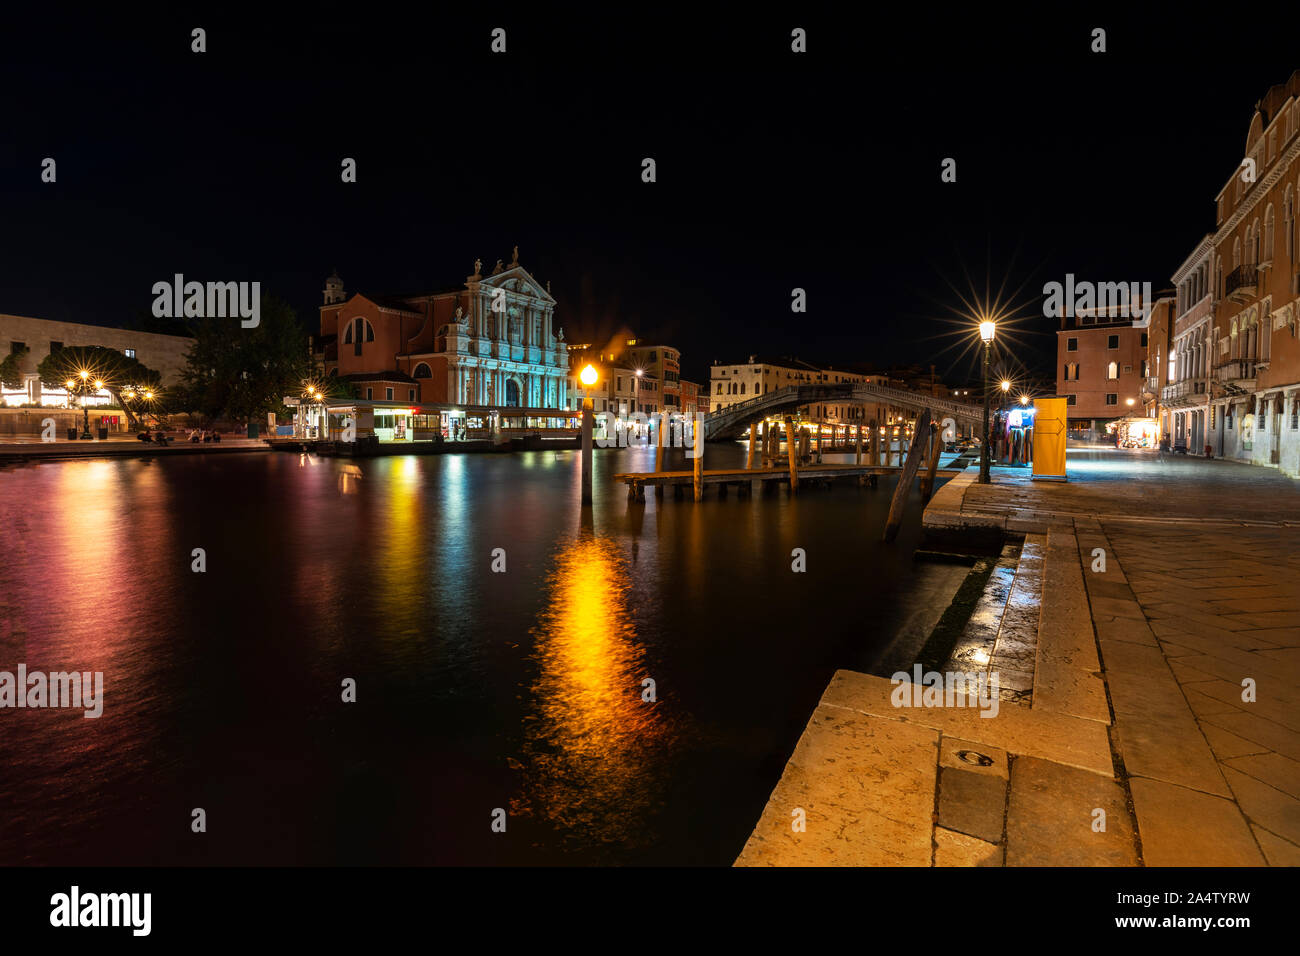 Grand Canal at night, It is one of the main tourist attractions in Venice and is famous place in Europe.Venice Italy. Stock Photo